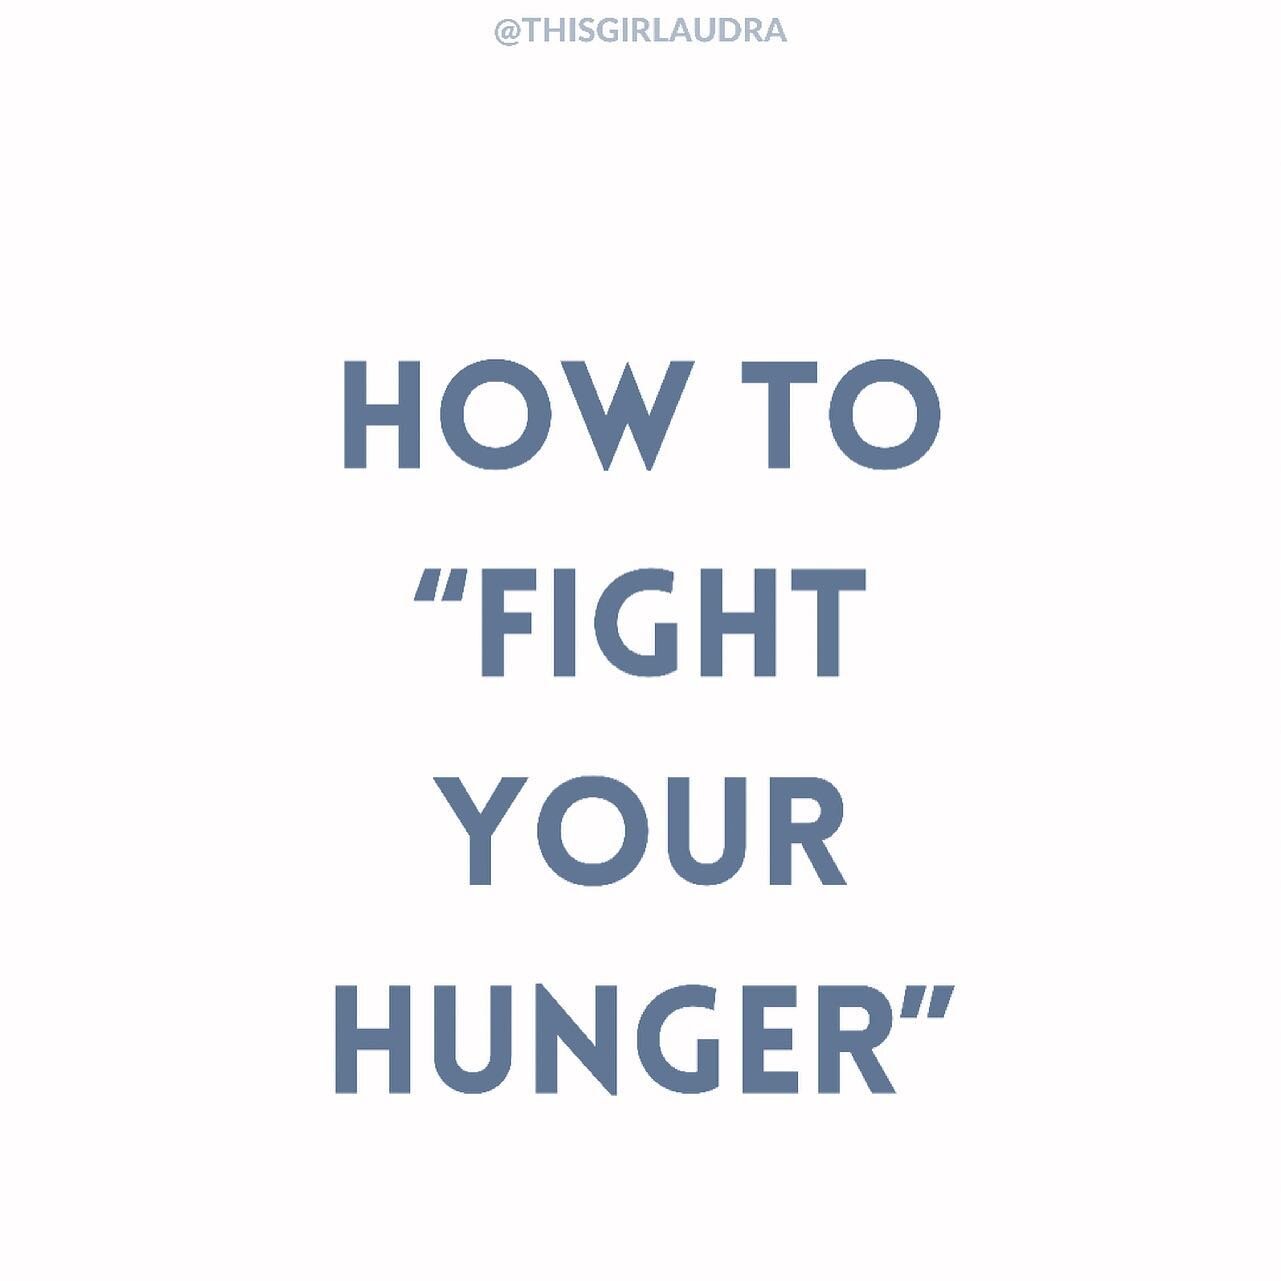 What&rsquo;s the craziest thing you ever did or heard on how to &ldquo;fight your hunger?&rdquo; 

Swipe right!! 👉🏼👉🏼👉🏼 

It&rsquo;s insane some of the things you&rsquo;ll hear/read that you should do 🙈 trust me, NONE of these work, especially